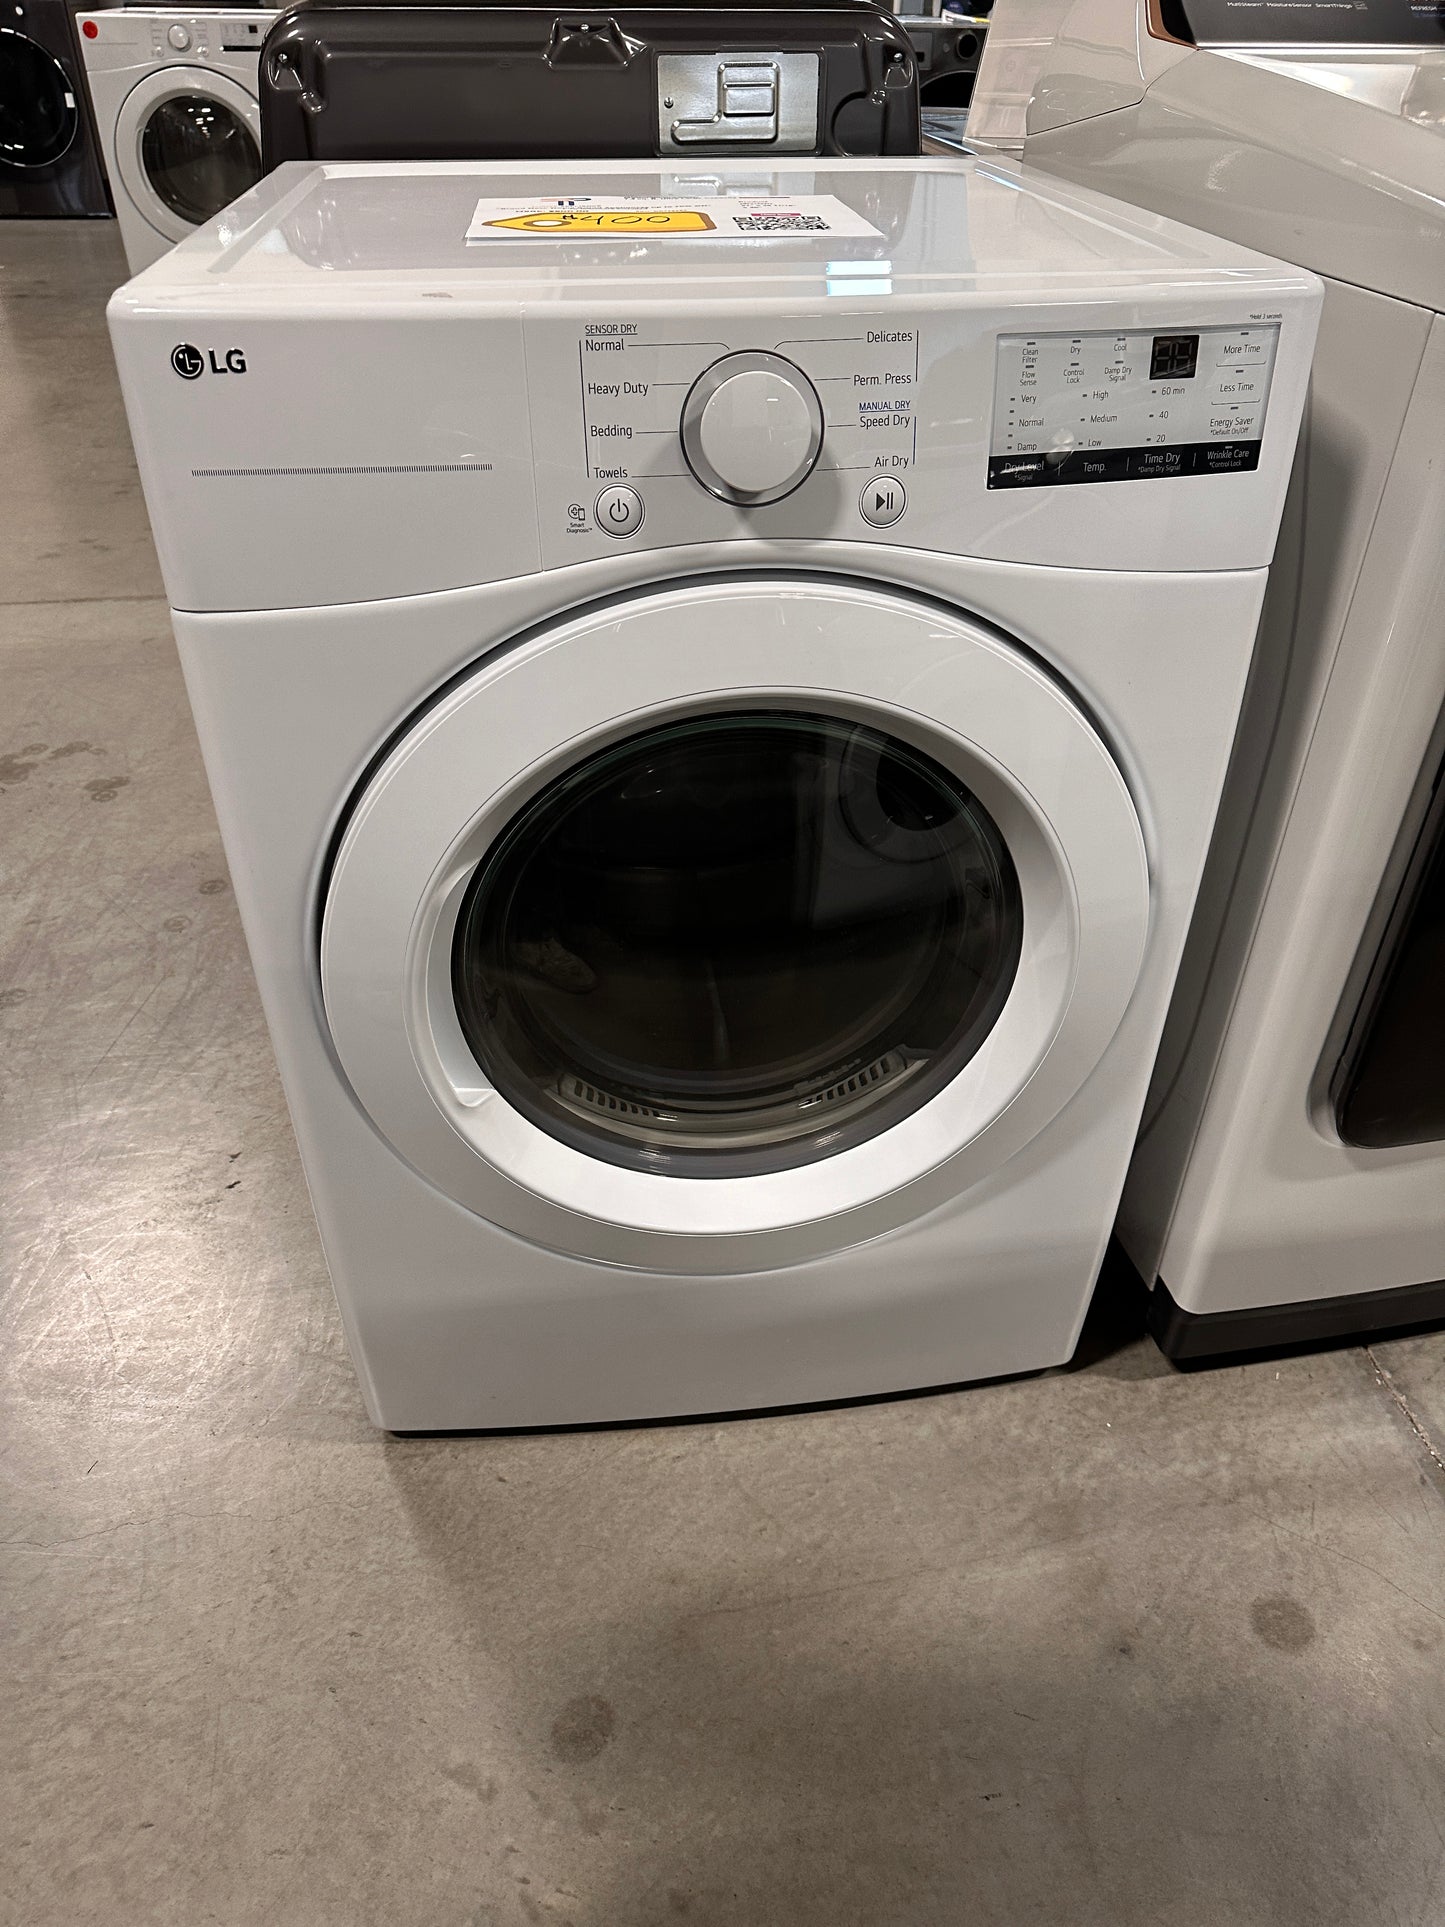 NEW LG - 7.4 Cu. Ft. Electric Dryer with Wrinkle Care - MODEL:DLE3400W  DRY12488